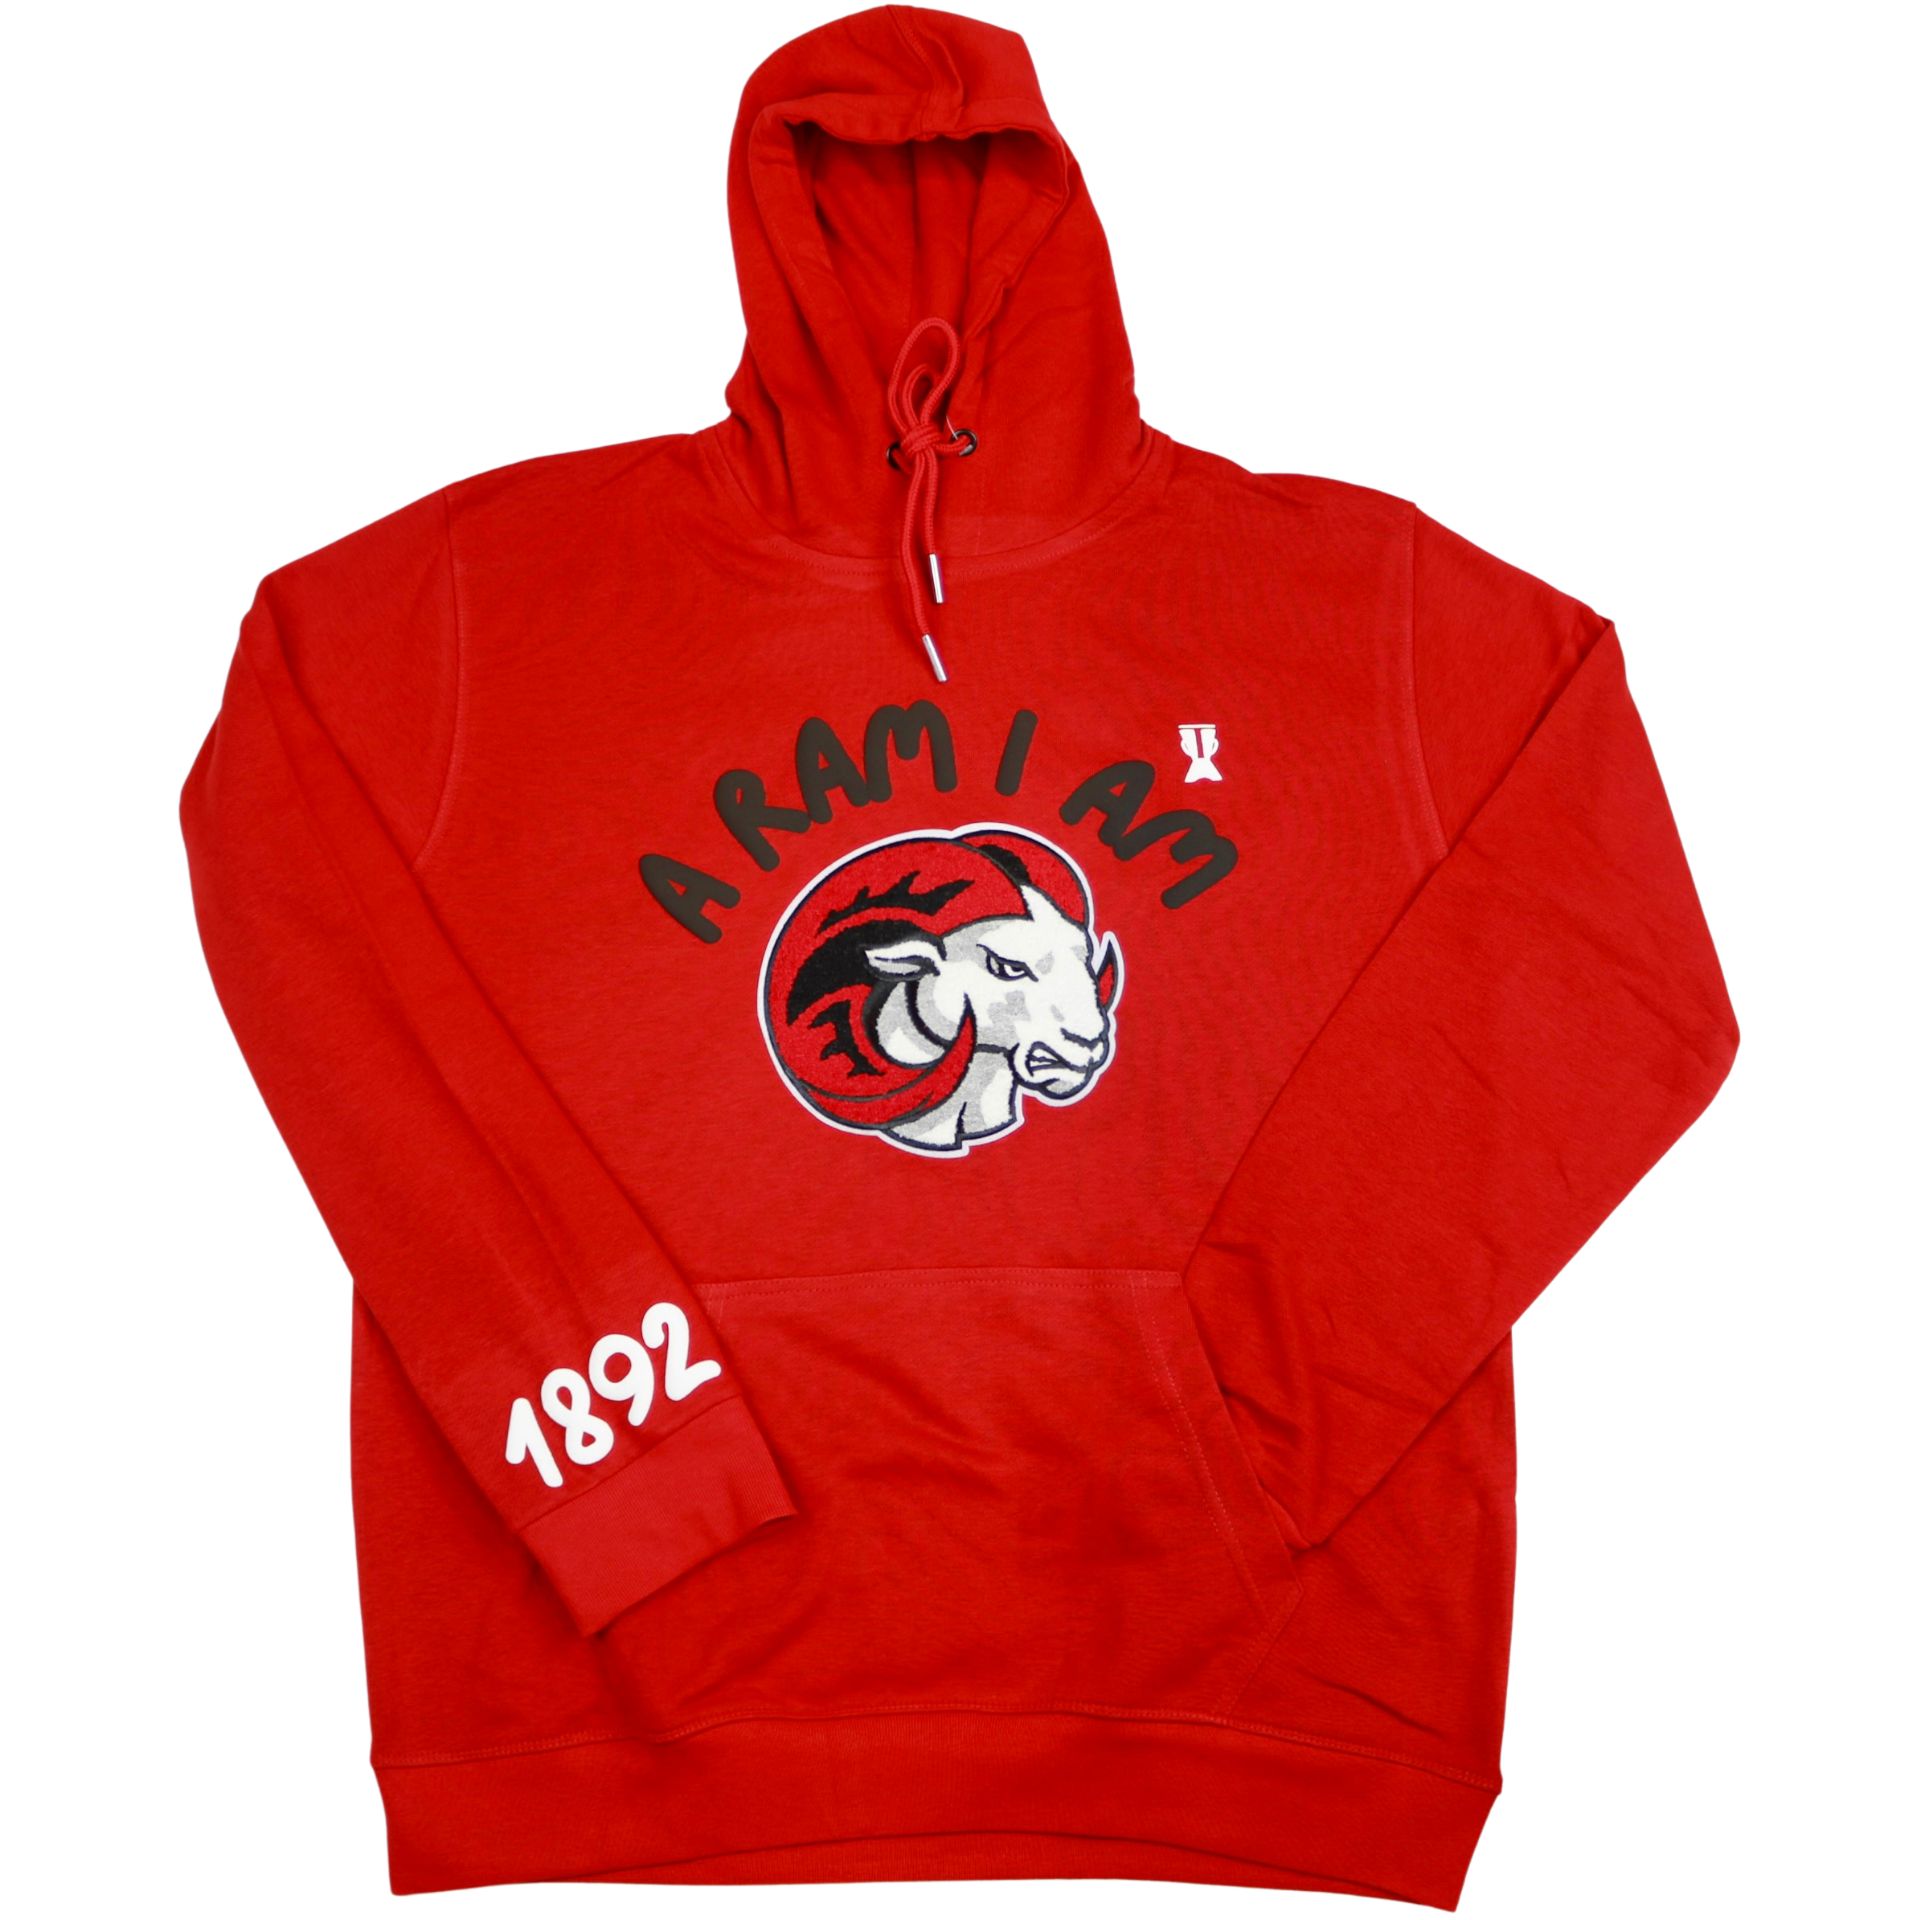 "A RAM I AM" CHENILLE EMBROIDERY HOODIE (RED)